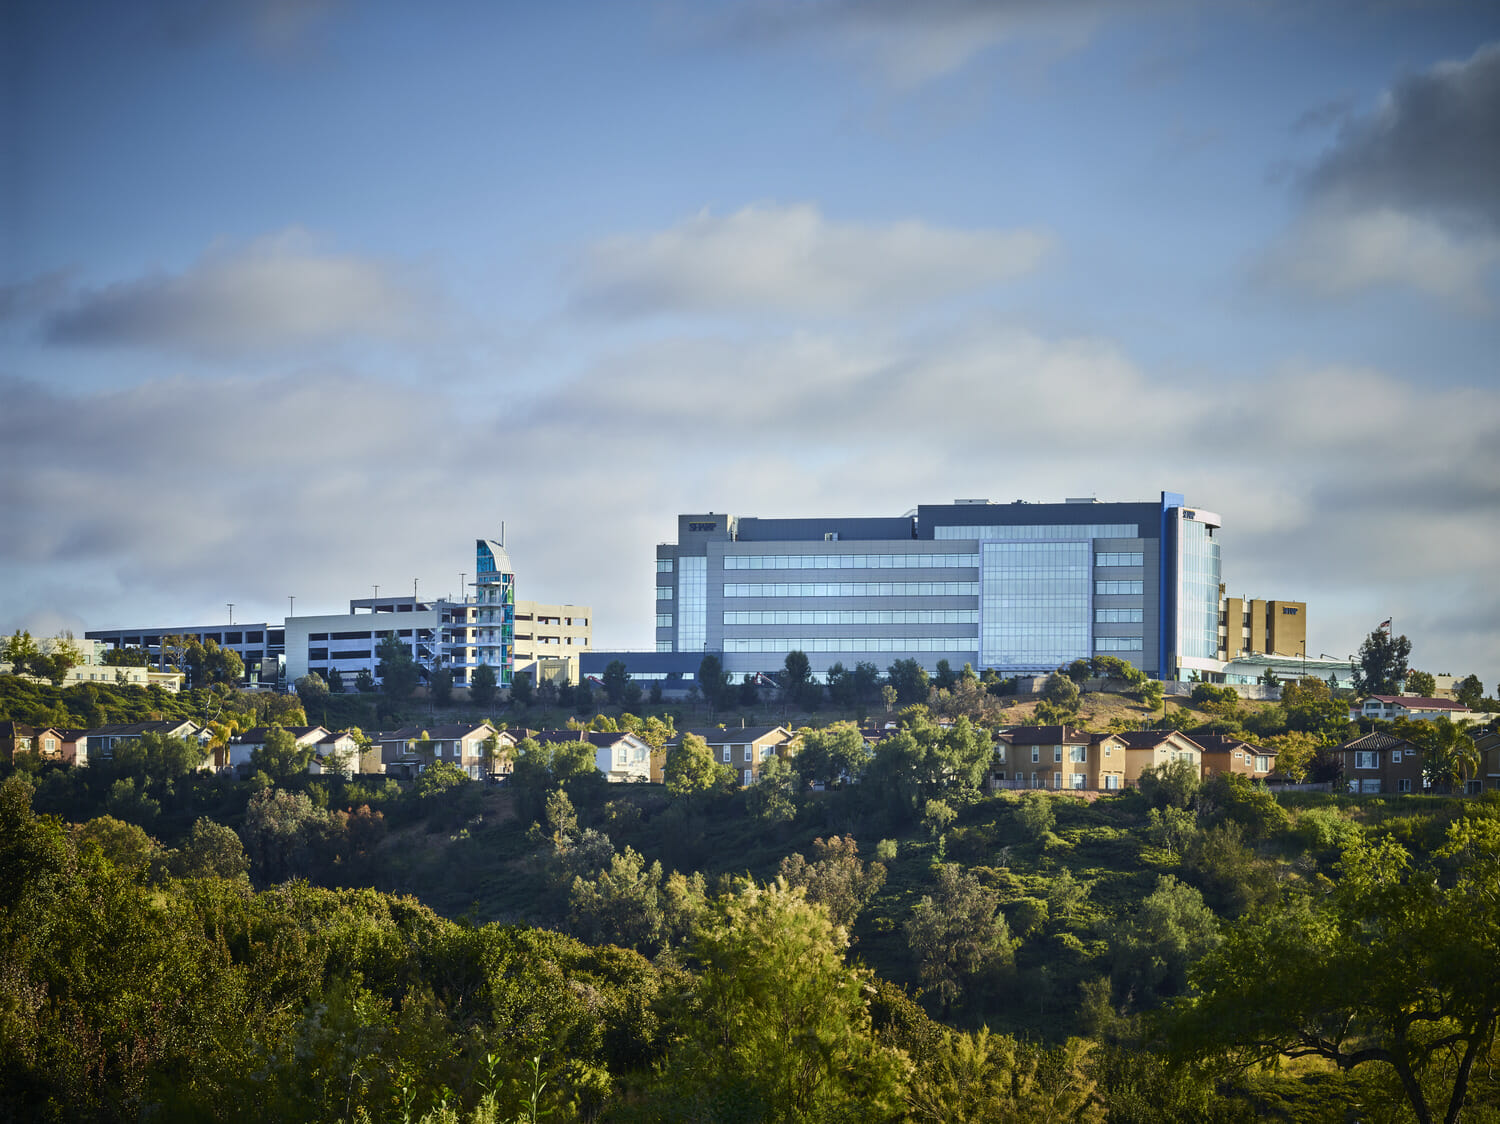 An EXP healthcare building sits atop a hill.